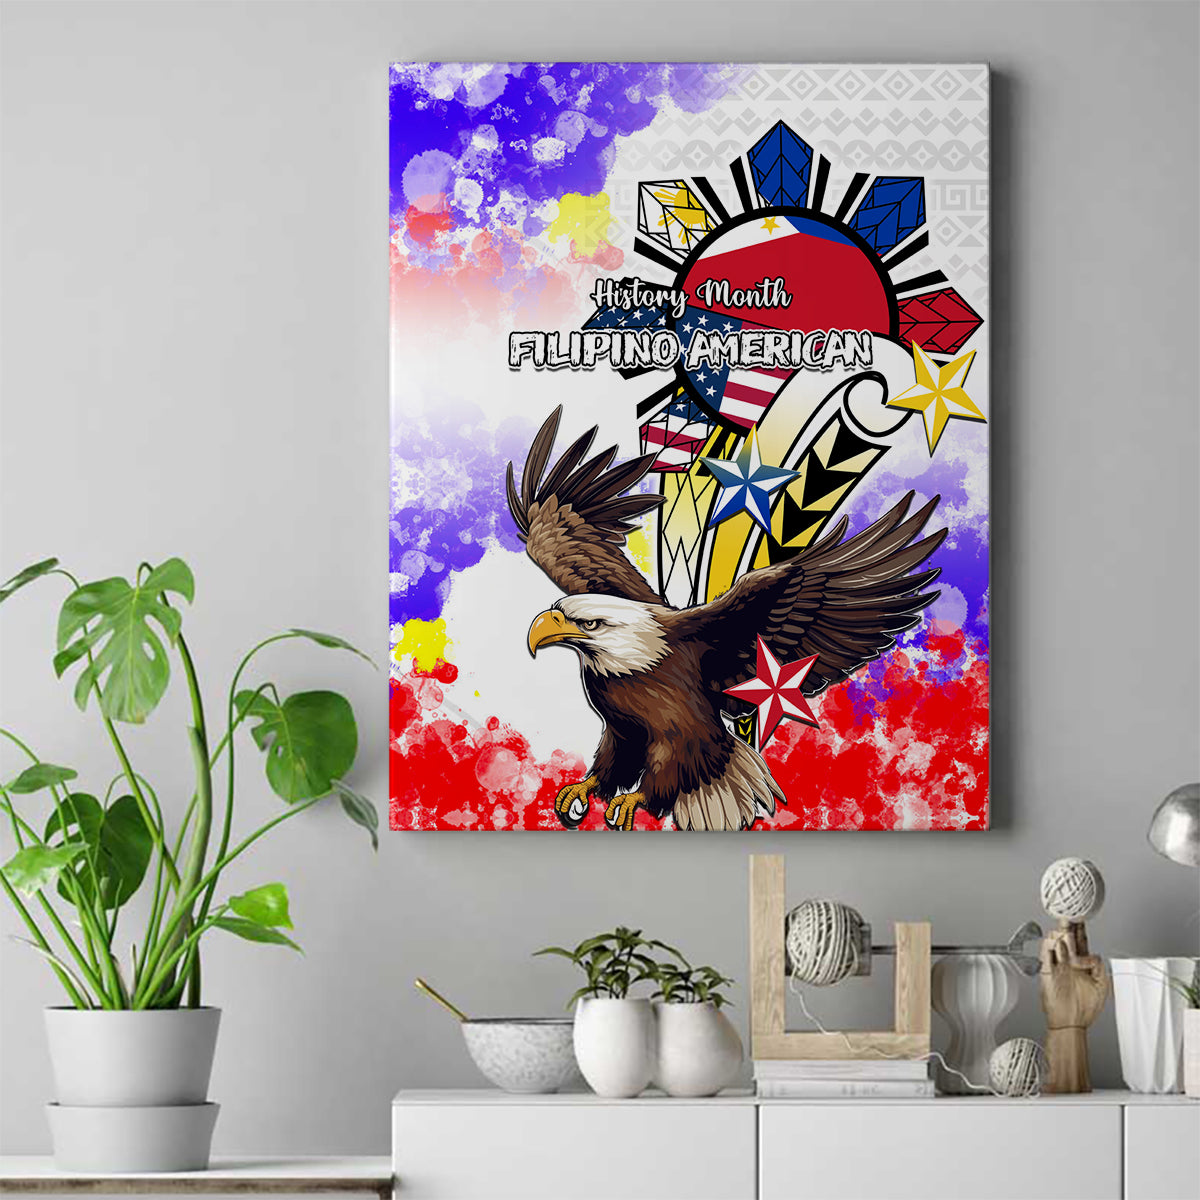 Filipino American History Month Canvas Wall Art The Eight-Rayed Sun Flags With Bald Eagle LT05 White - Polynesian Pride